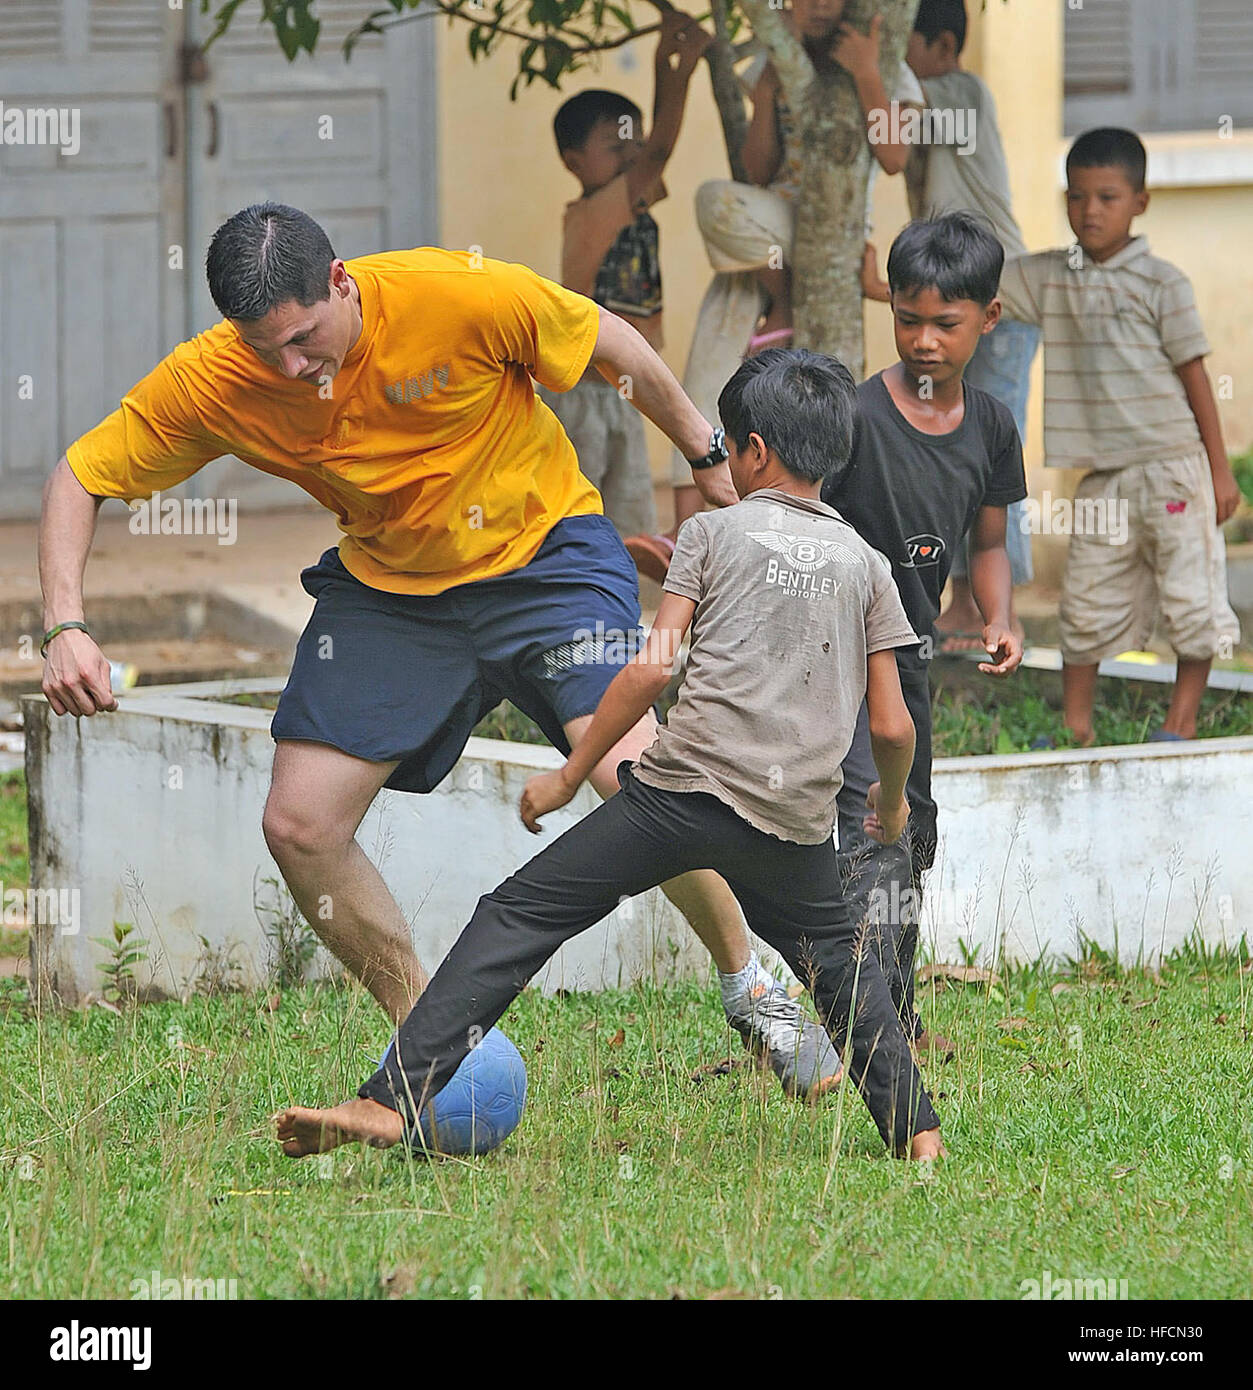 U.S. Navy Hospital Corpsman 3rd Class Alex Criollo plays soccer with Cambodian children during a Pacific Partnership 2012 community service event at Beung Pring Primary School, Aug. 7, 2012, in Sihanoukville, Cambodia Pacific Partnership is an annual deployment of forces designed to strengthen maritime and humanitarian partnerships during disaster relief operations, while providing humanitarian, medical, dental and engineering assistance to nations of the Pacific. (U.S. Navy photo by Mass Communication Specialist 2nd Class Roadell Hickman) Pacific Partnership 2012 120807-N-KW566-003 Stock Photo